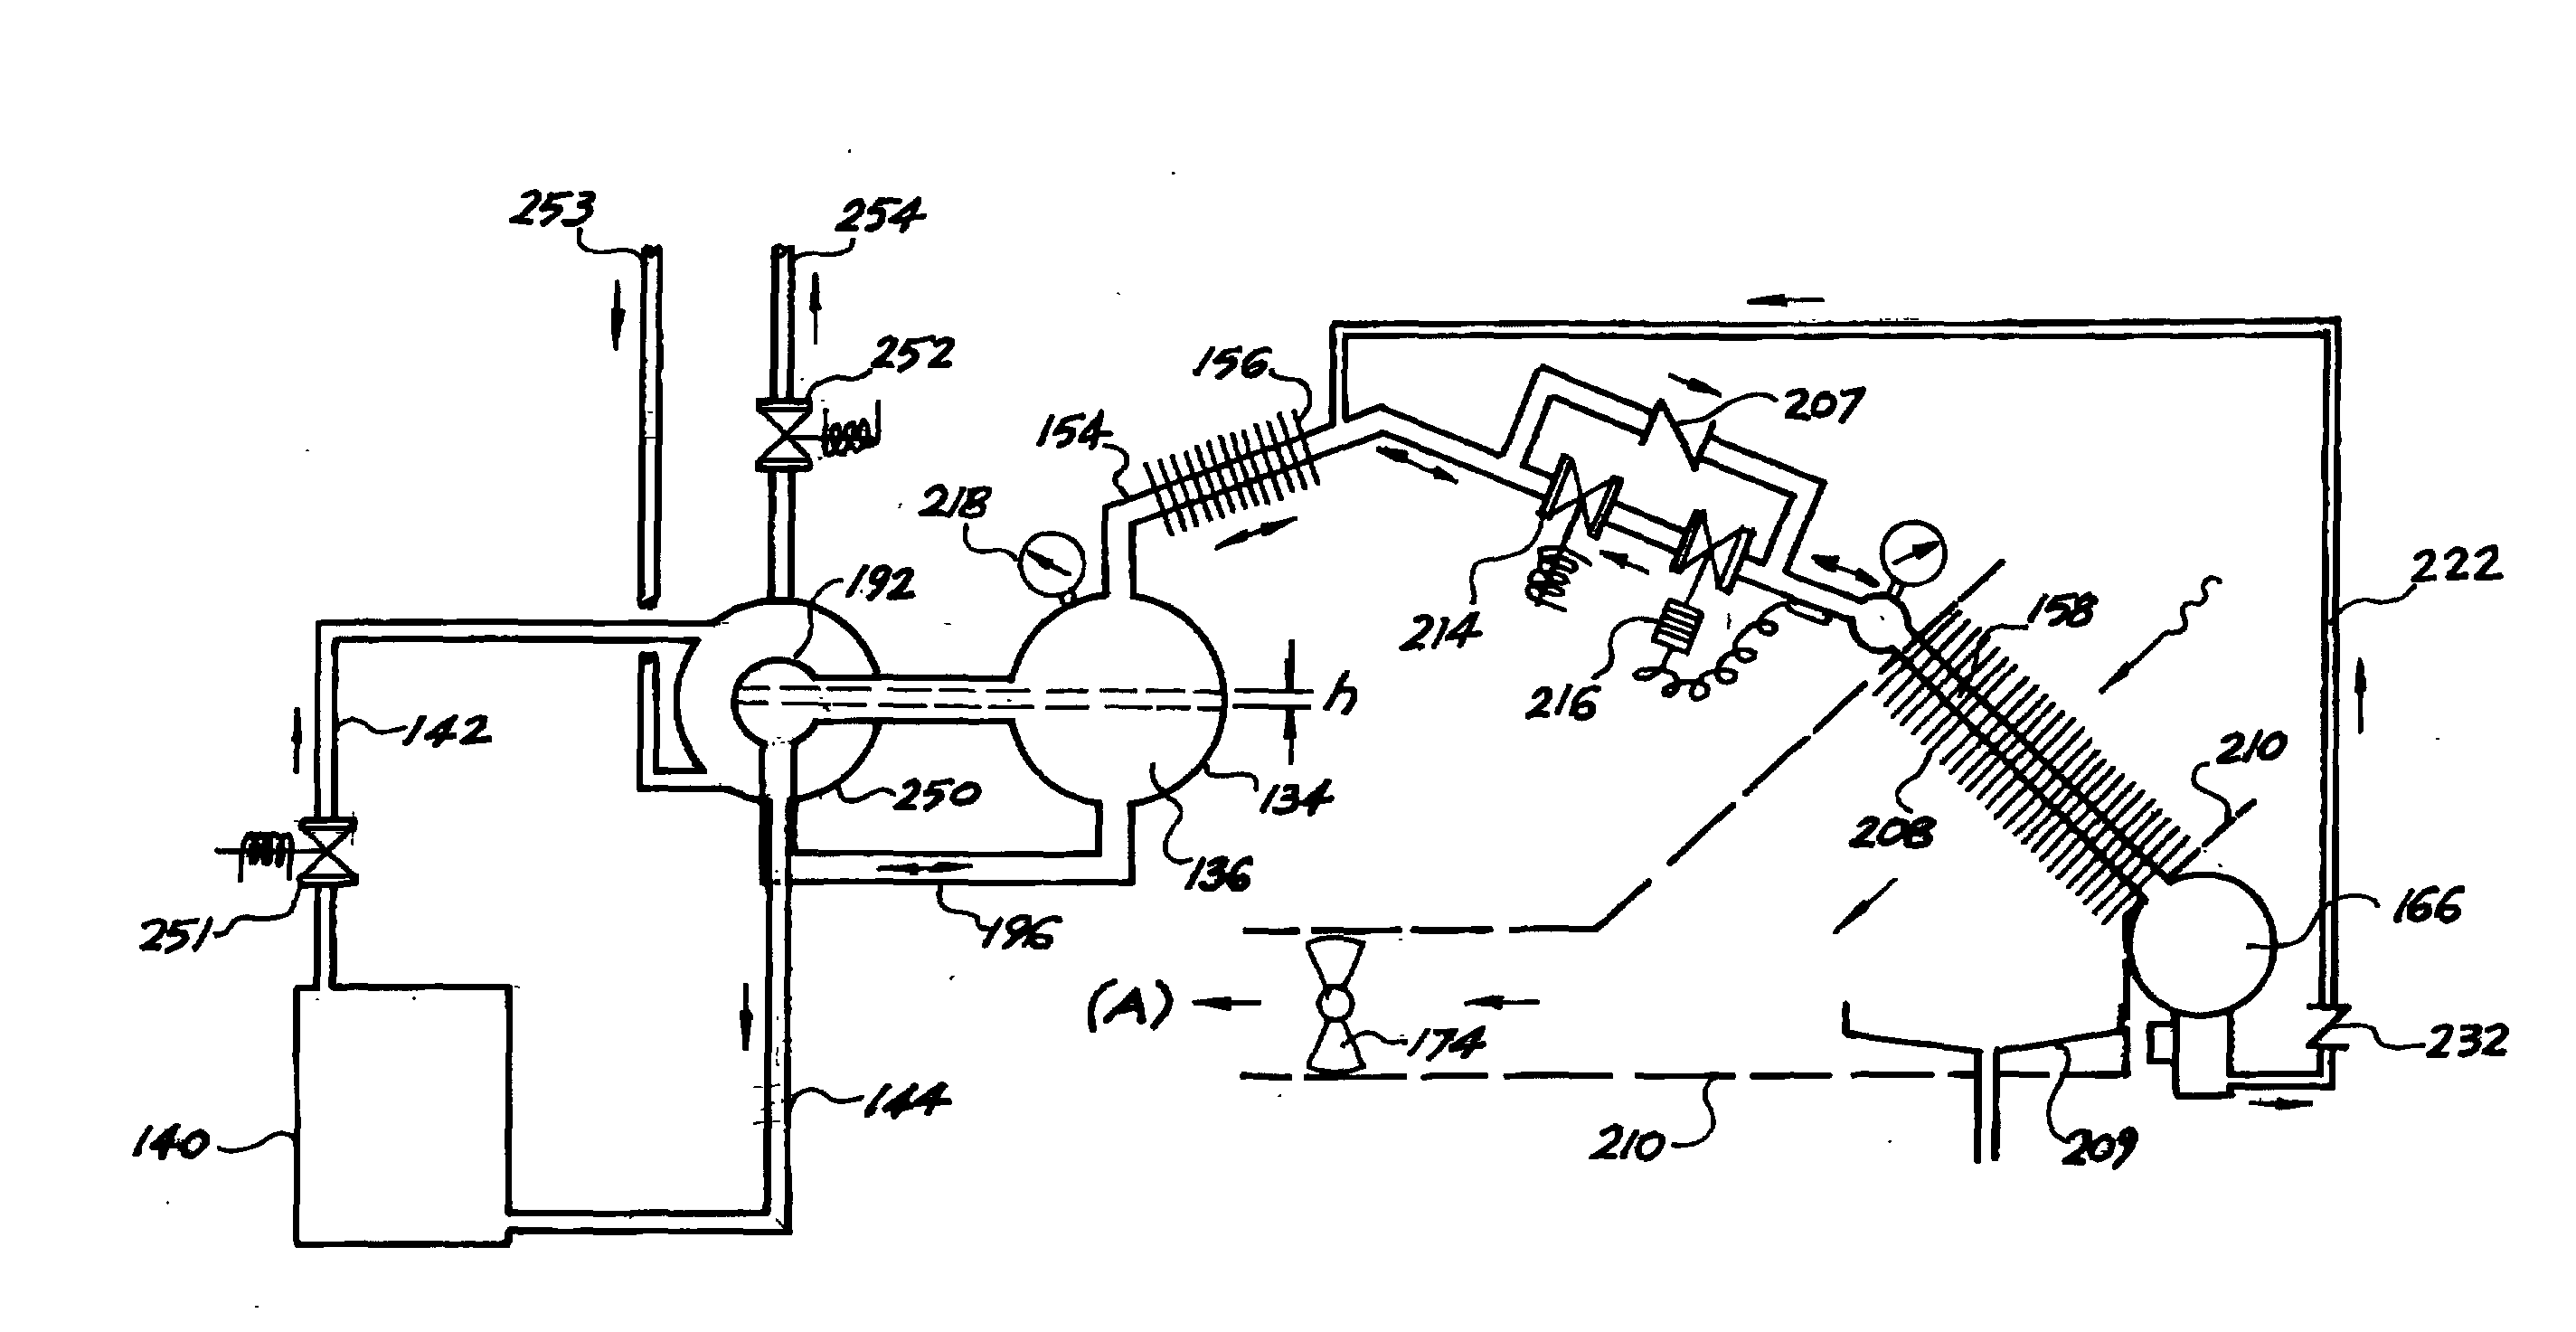 Single Cycle Apparatus for Condensing Water from Ambient Air